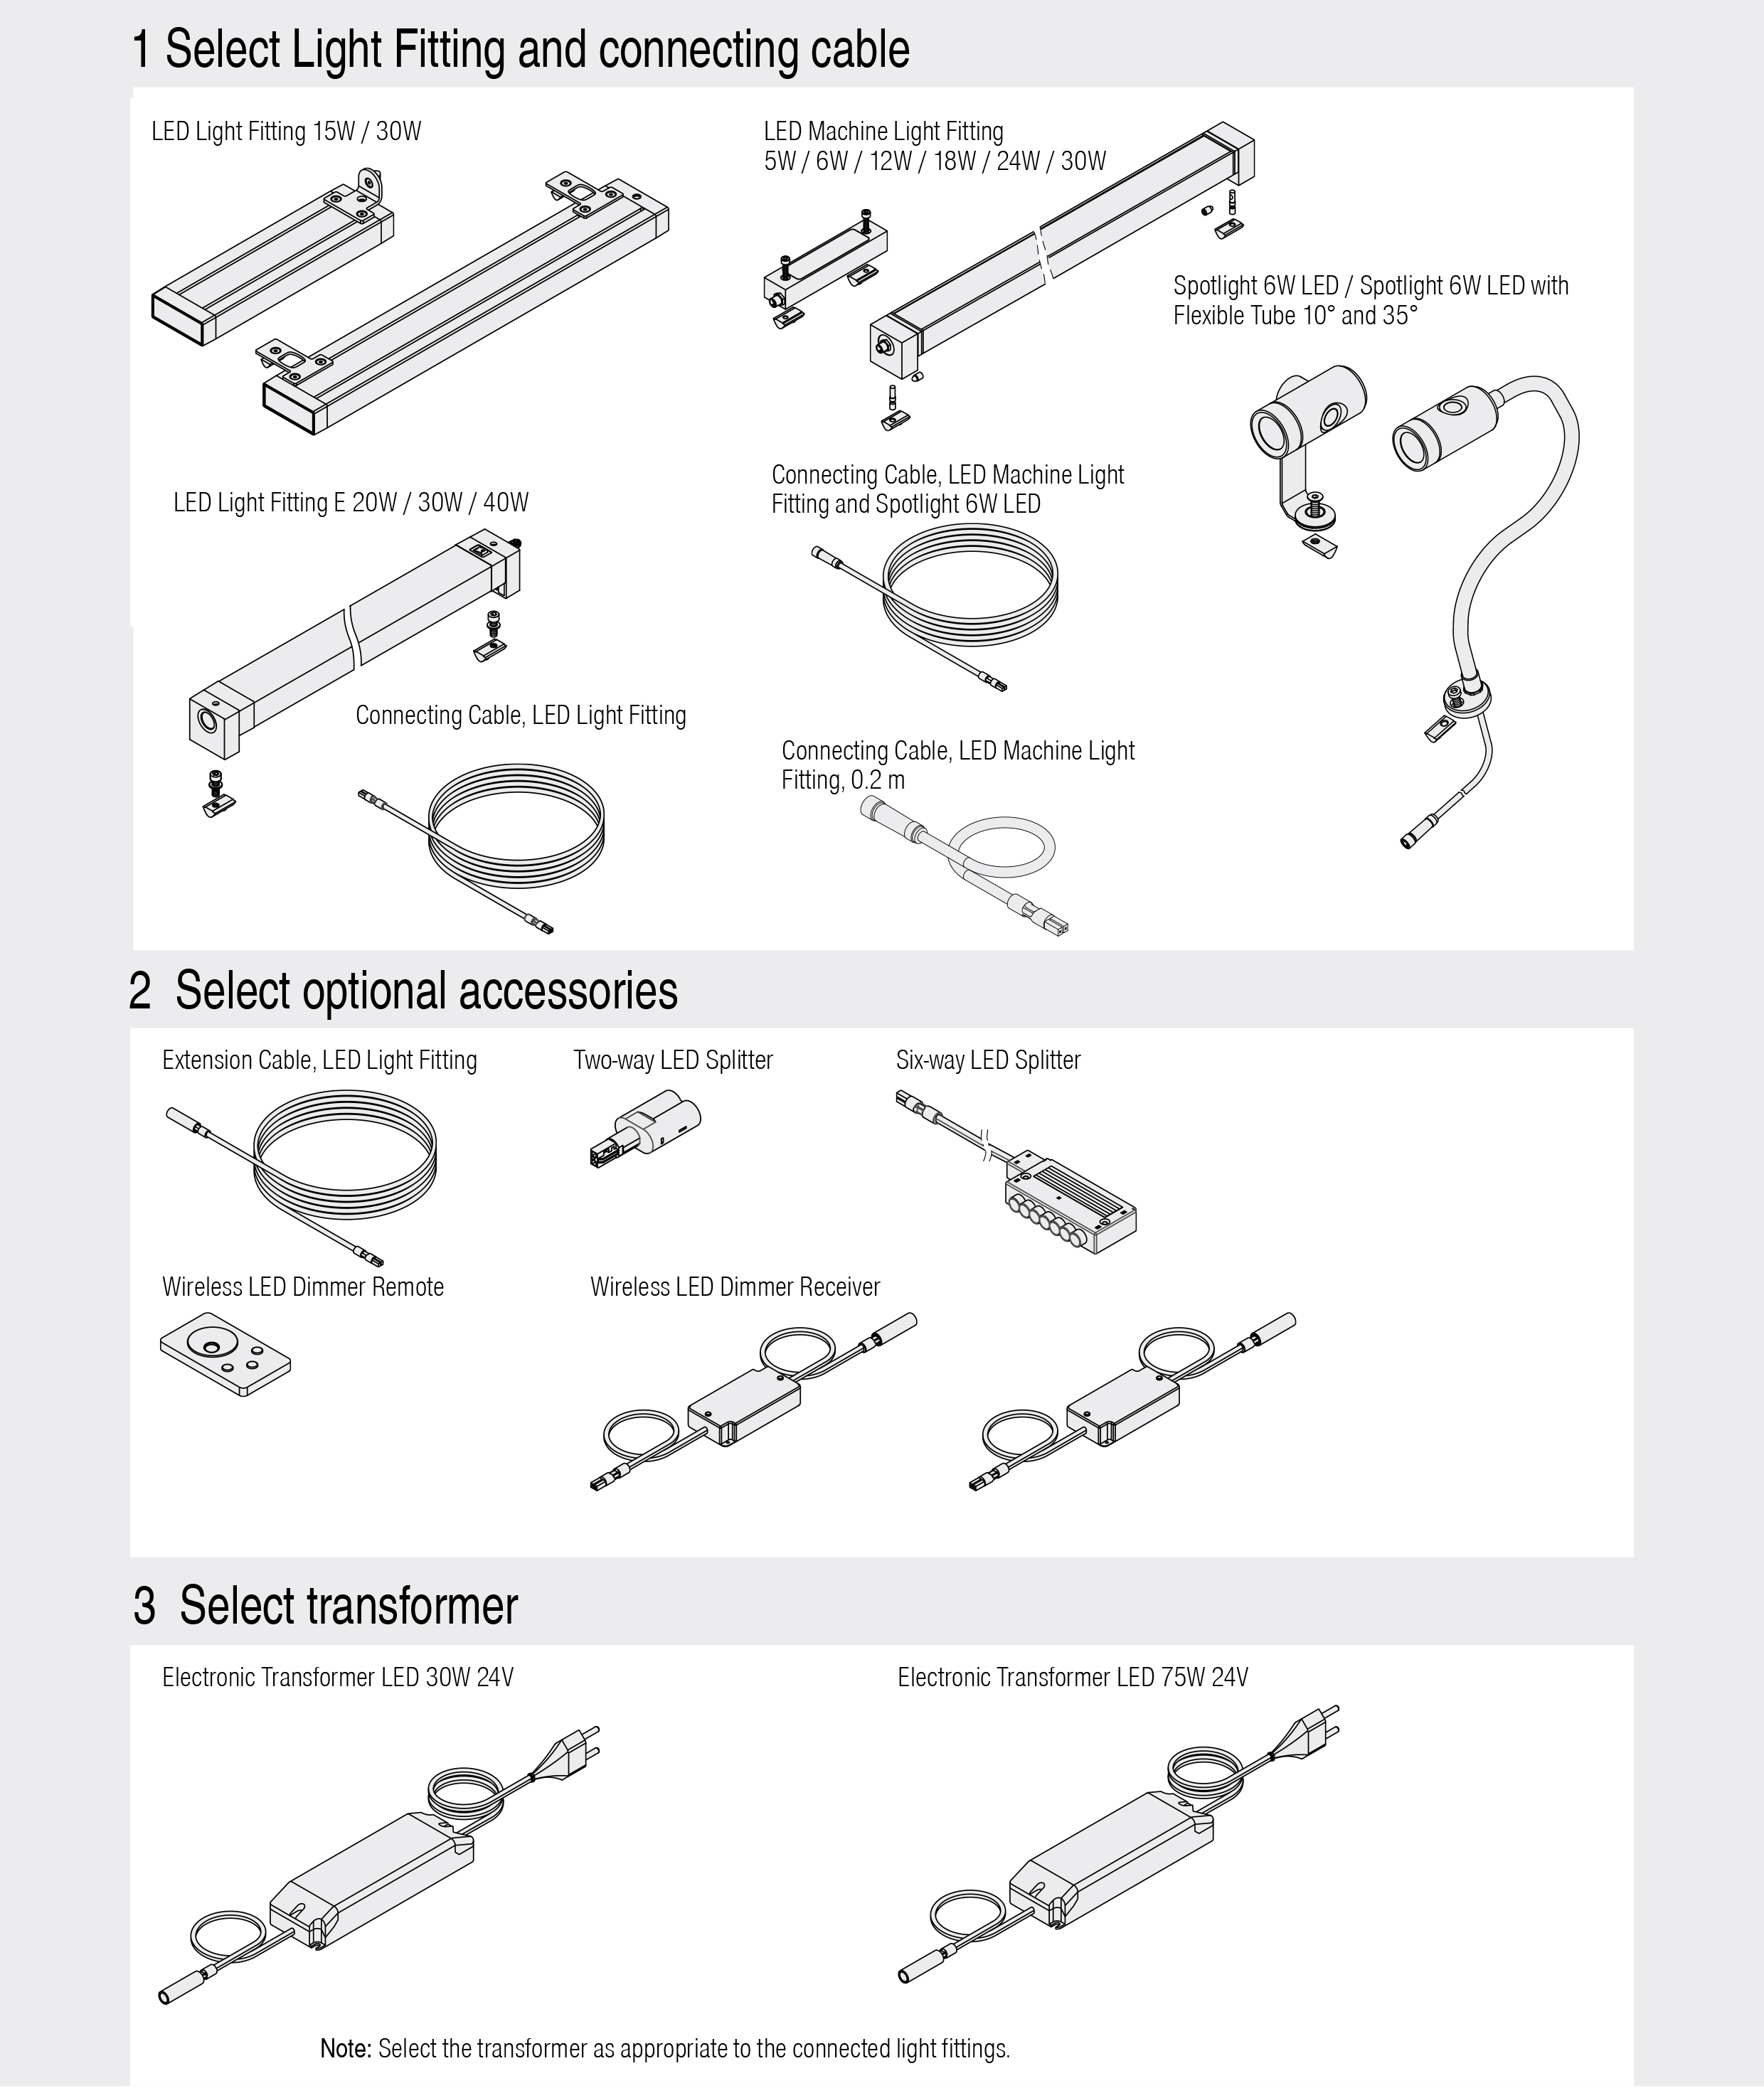 Extension Cable, LED Light Fitting